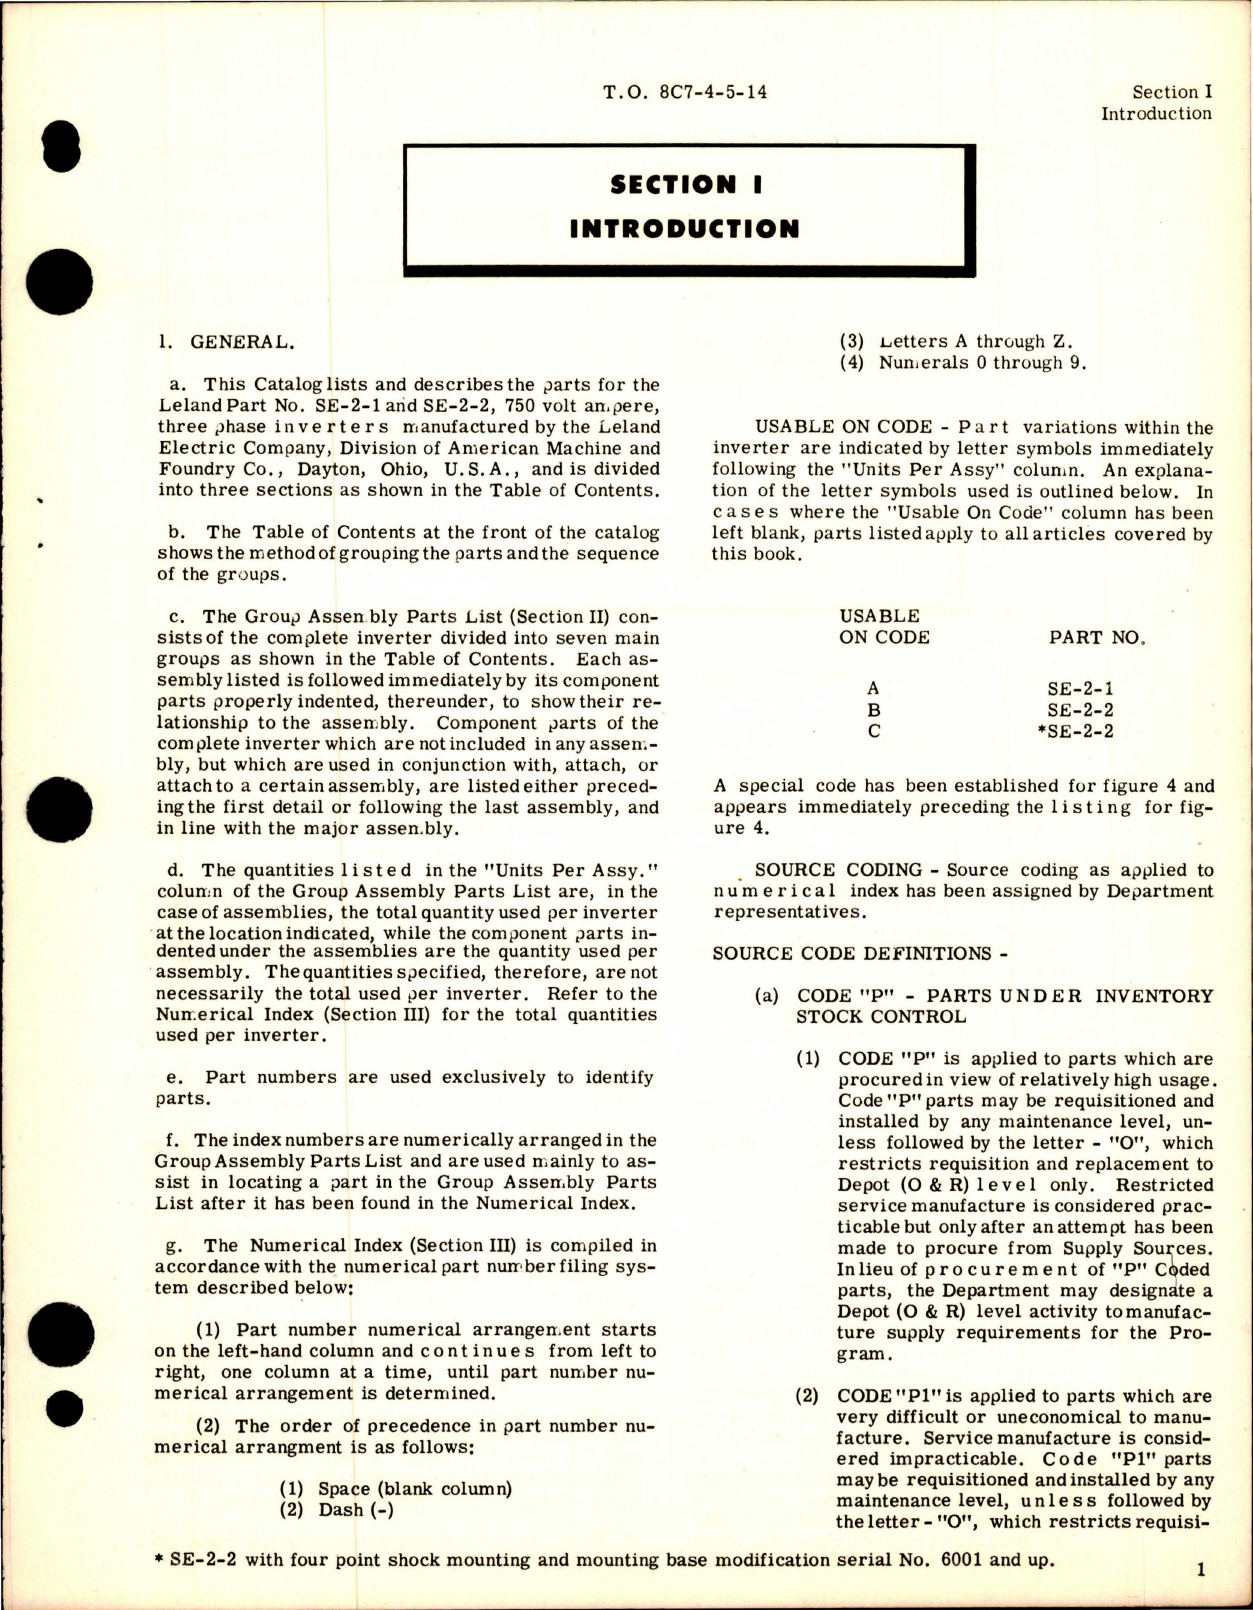 Sample page 5 from AirCorps Library document: Illustrated Parts Breakdown for AN 3534-1 Inverter - Part SE-2-1 and SE-2-2 